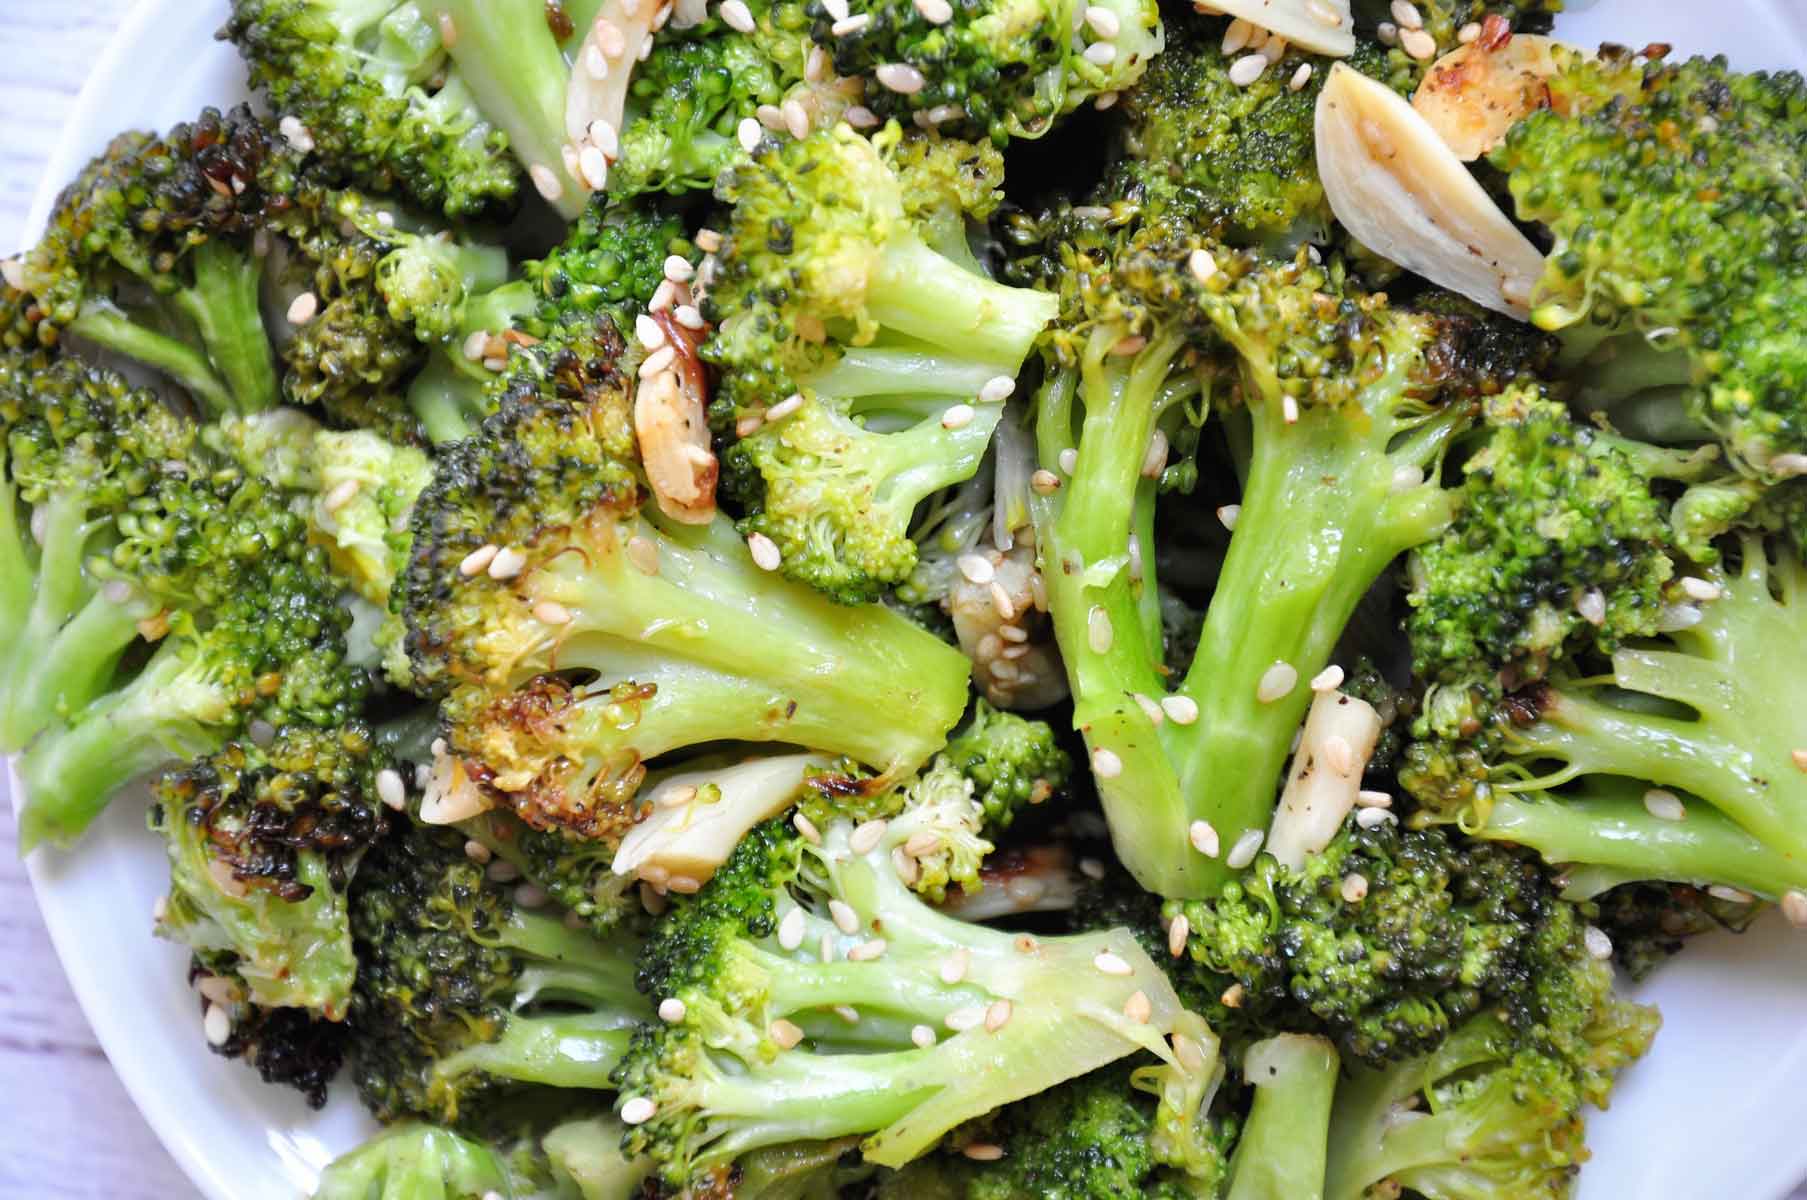 Air fried broccoli garnished with sesame seeds.